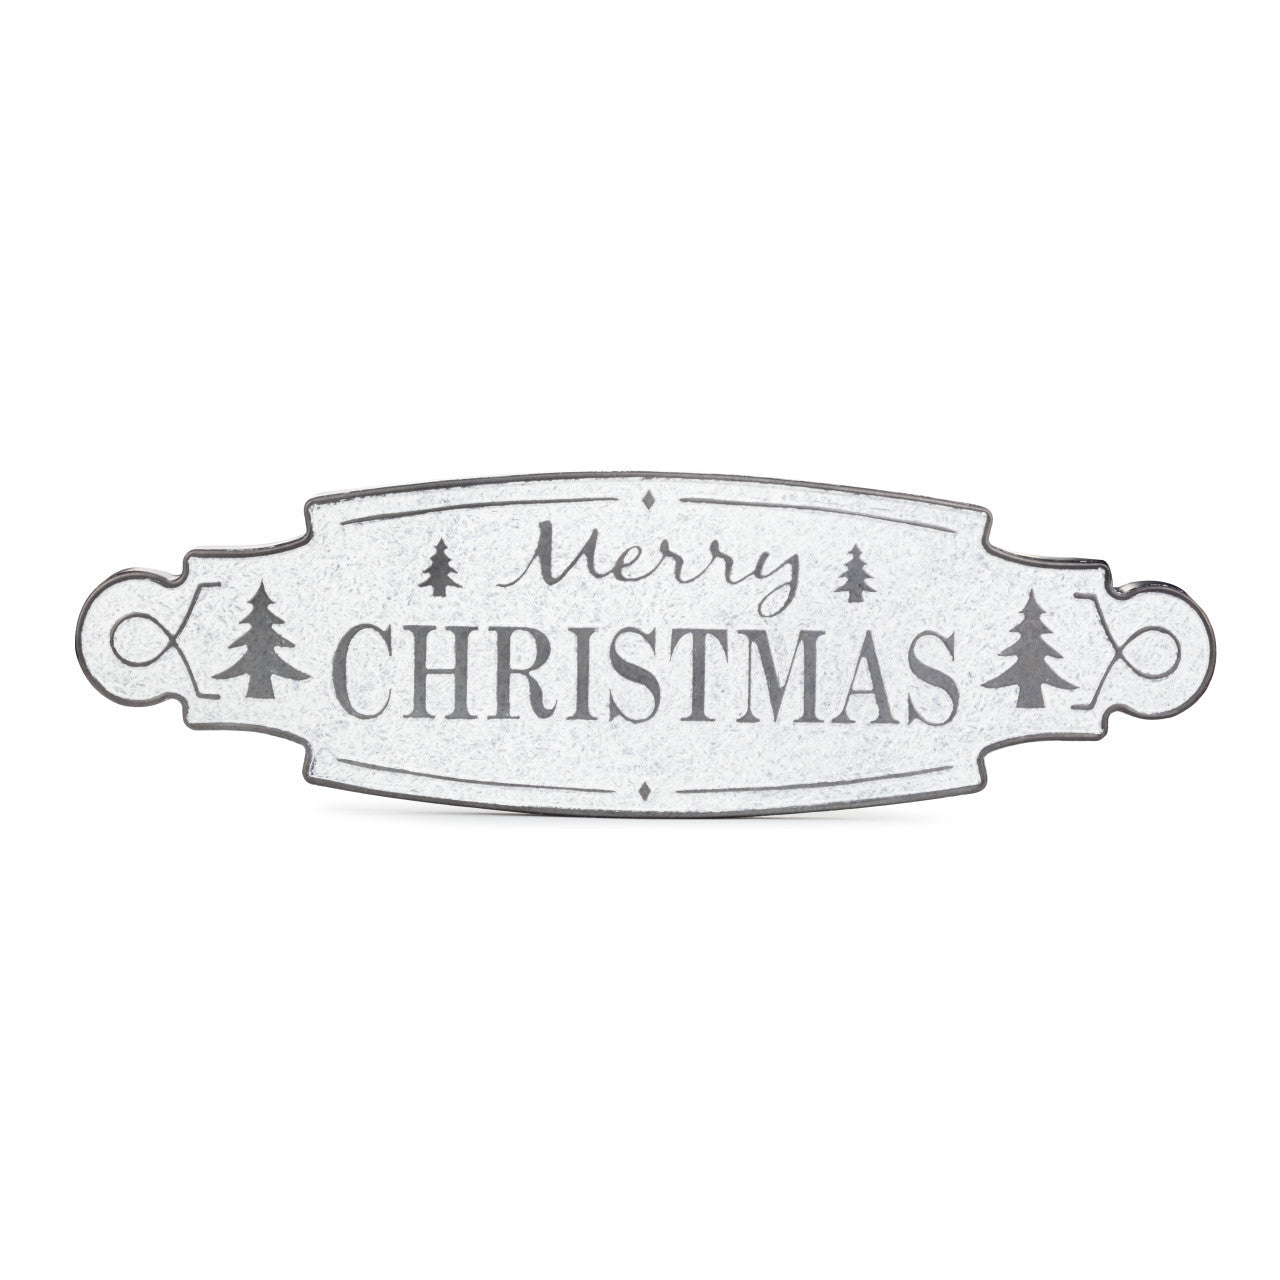 Merry Christmas White and Silver Wall Decor